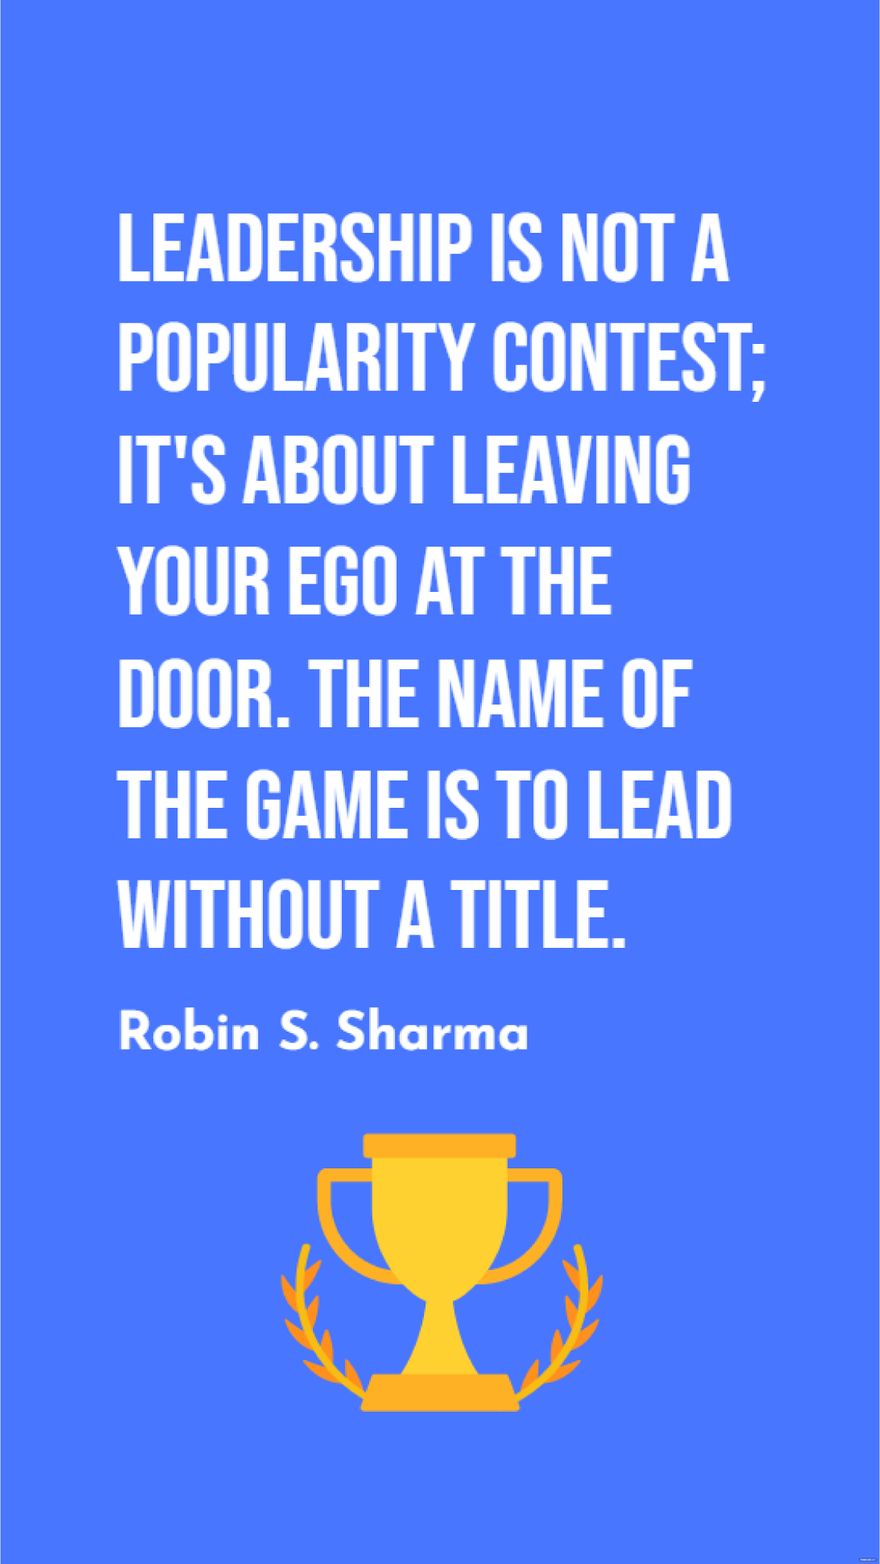 Free Robin S. Sharma - Leadership is not a popularity contest; it's about leaving your ego at the door. The name of the game is to lead without a title.